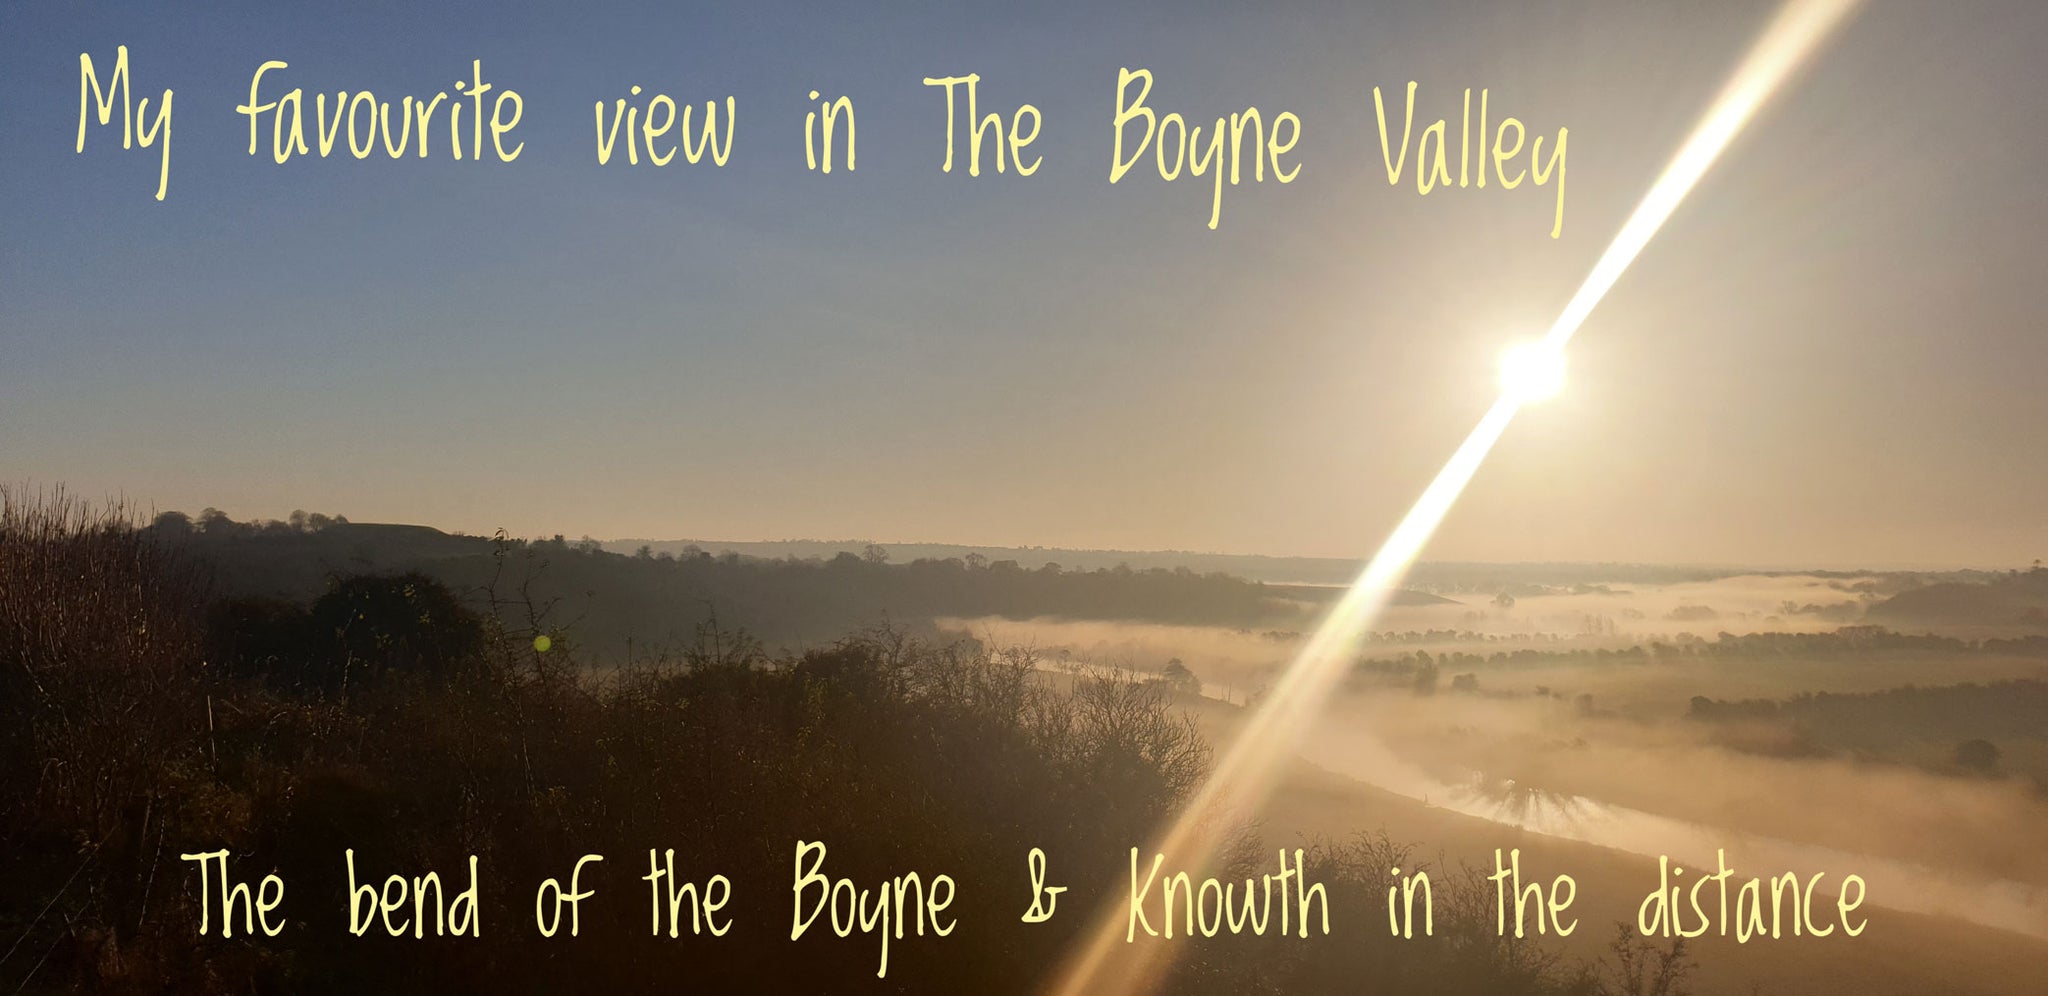 My favourite view in the Boyne Valley; The bend of the Boyne and Knowth in the distance